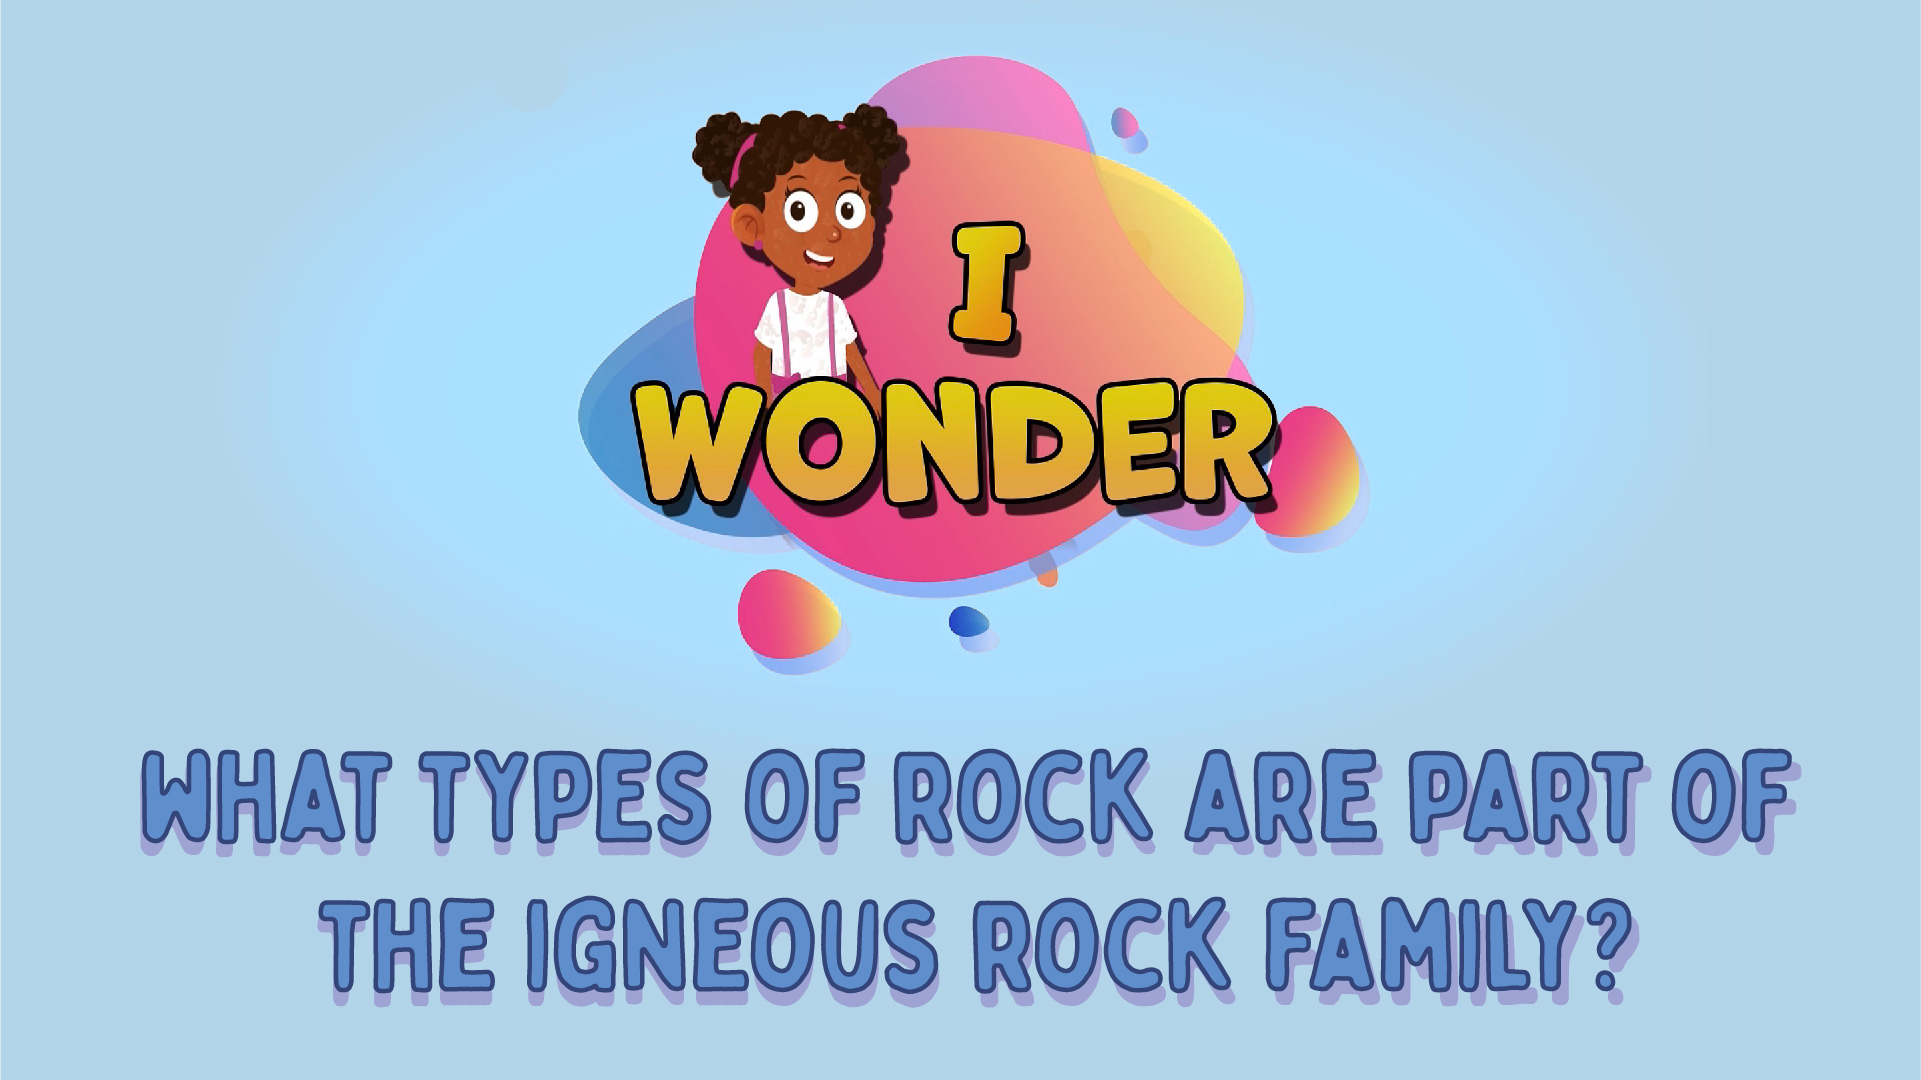 What Types Of Rock Are Part Of The Igneous Rock Family?